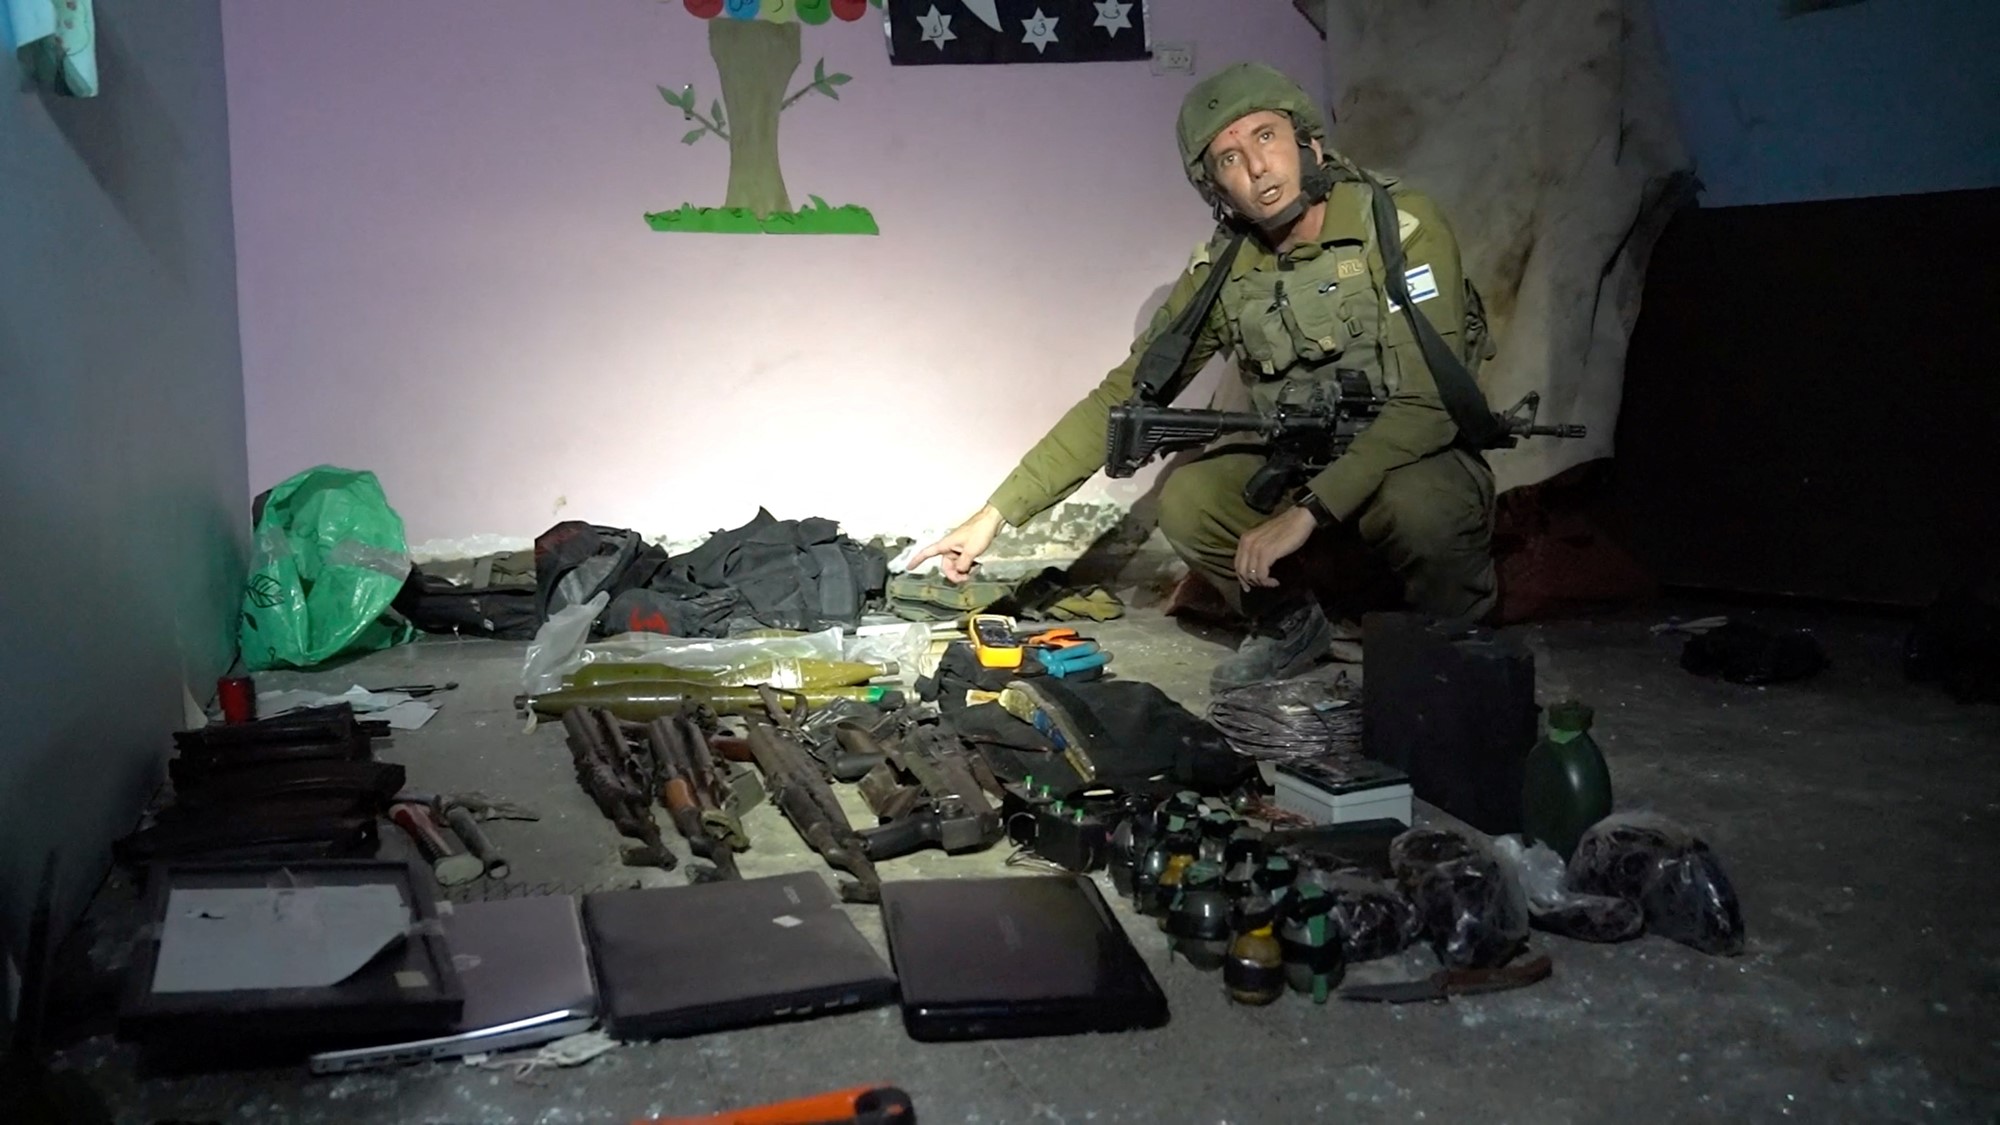 A man wearing a military uniform squatting near weapons laid out on the floor